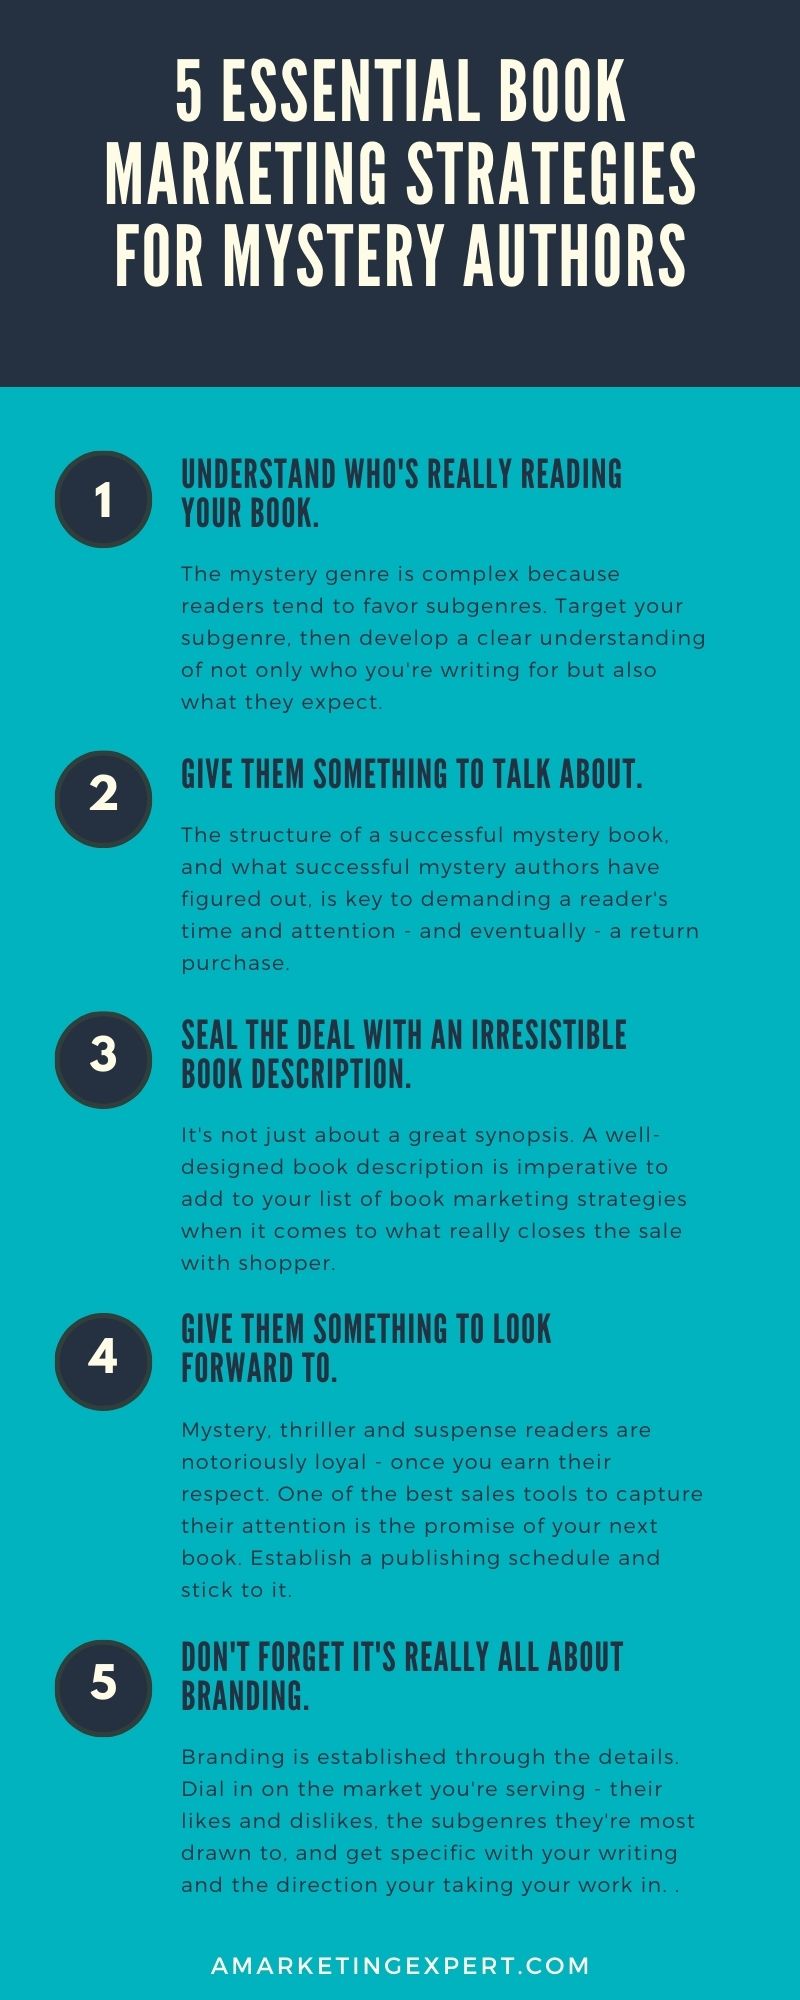 5-Essential-Book-Marketing-Strategies-for-Mystery-Authors